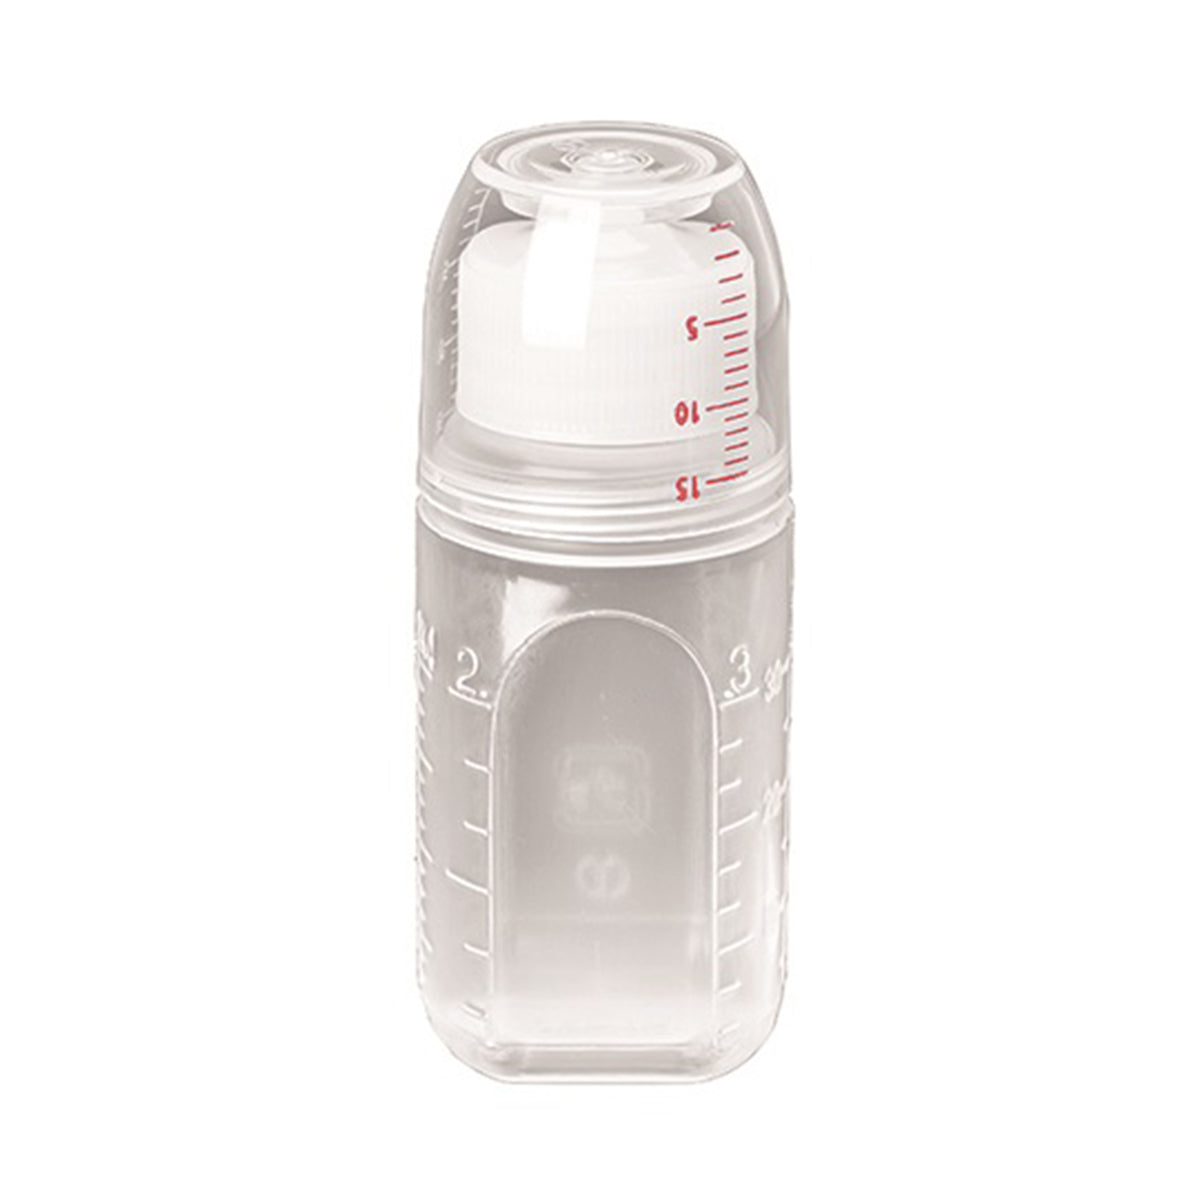 Evernew Evanu Alc.bottle w/cup 30ml